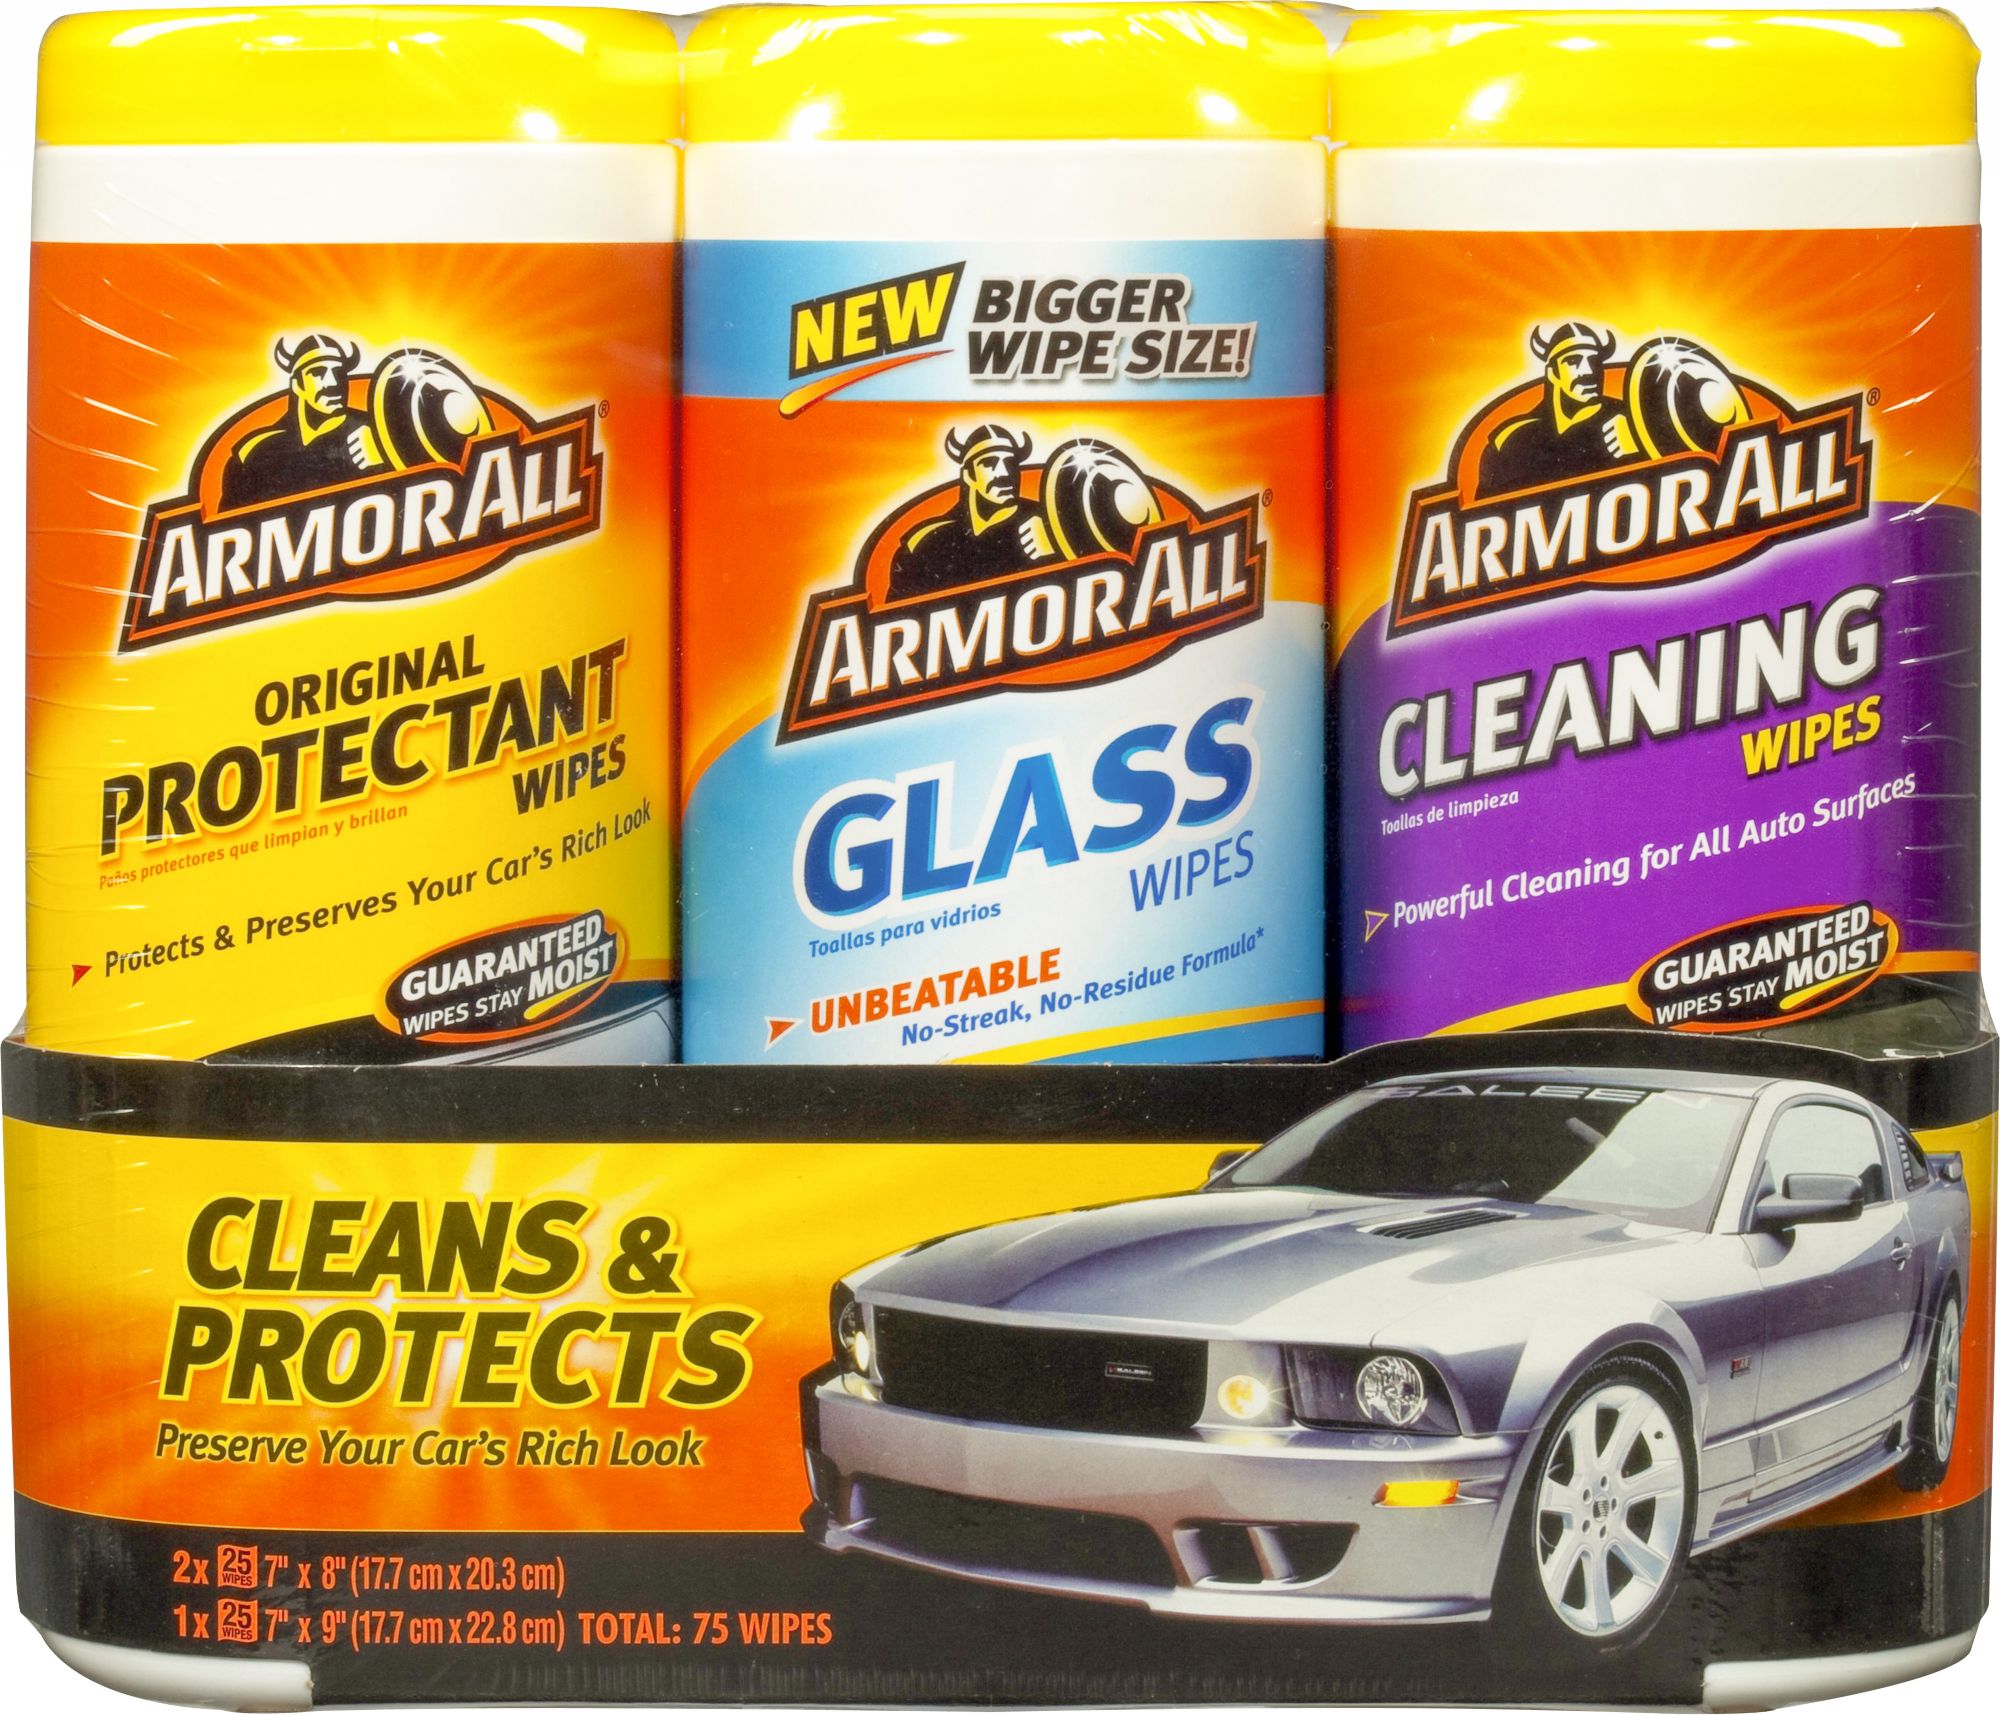 Armor All Auto Care Cleaning Kit, Triple Pack - 75 wipes total